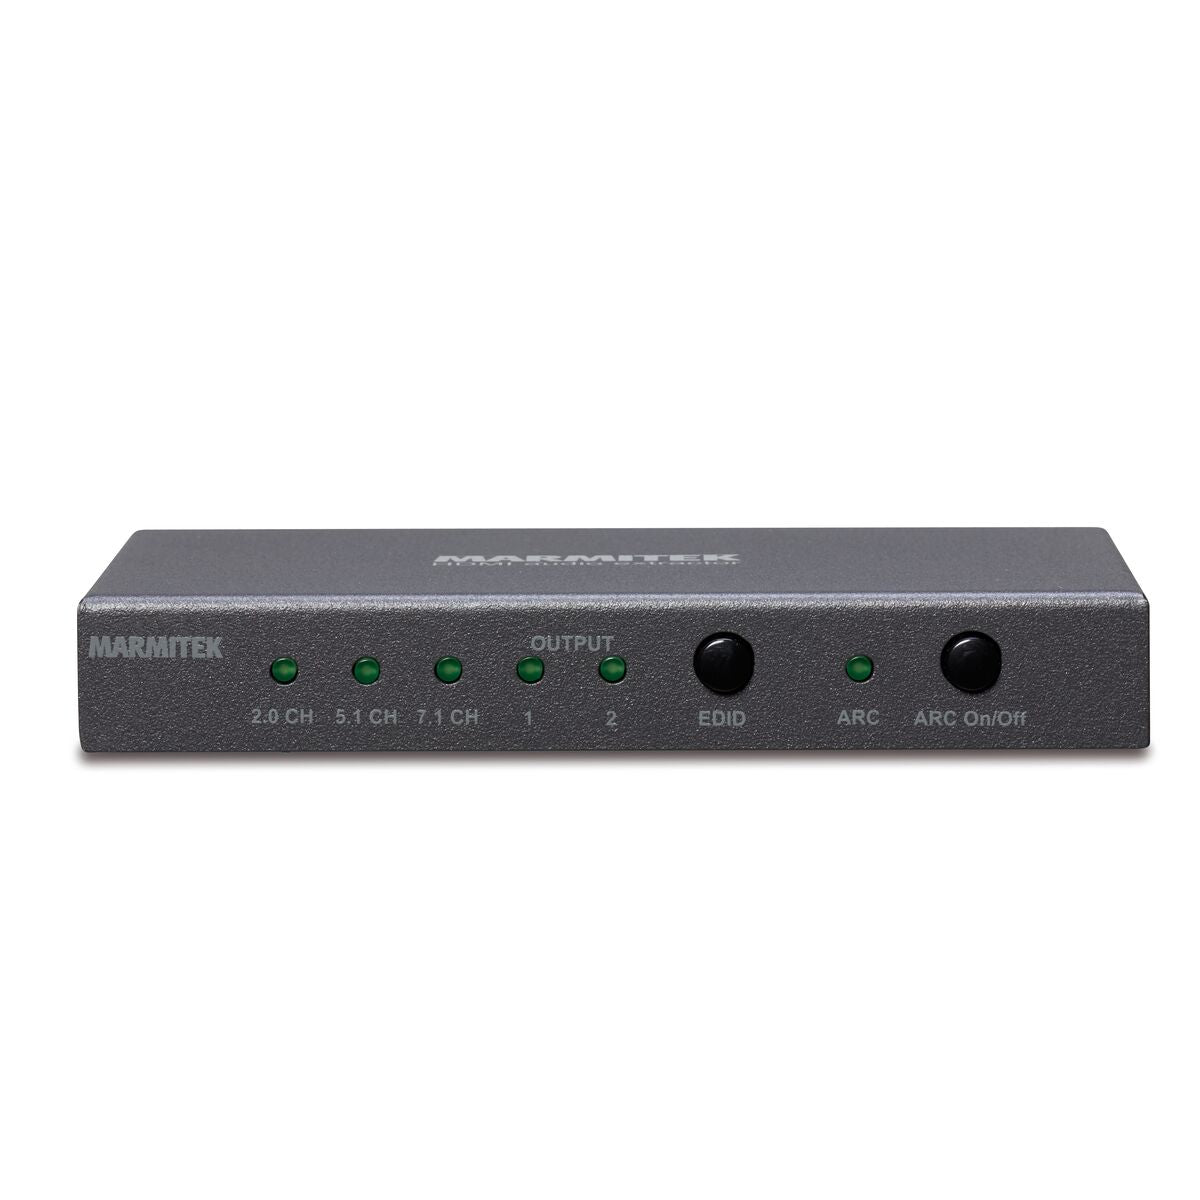 Connect AE24 UHD 2.0 - HDMI-Audio-Extractor 4K - 4K60 - HDR - ARC - 18 Gbps